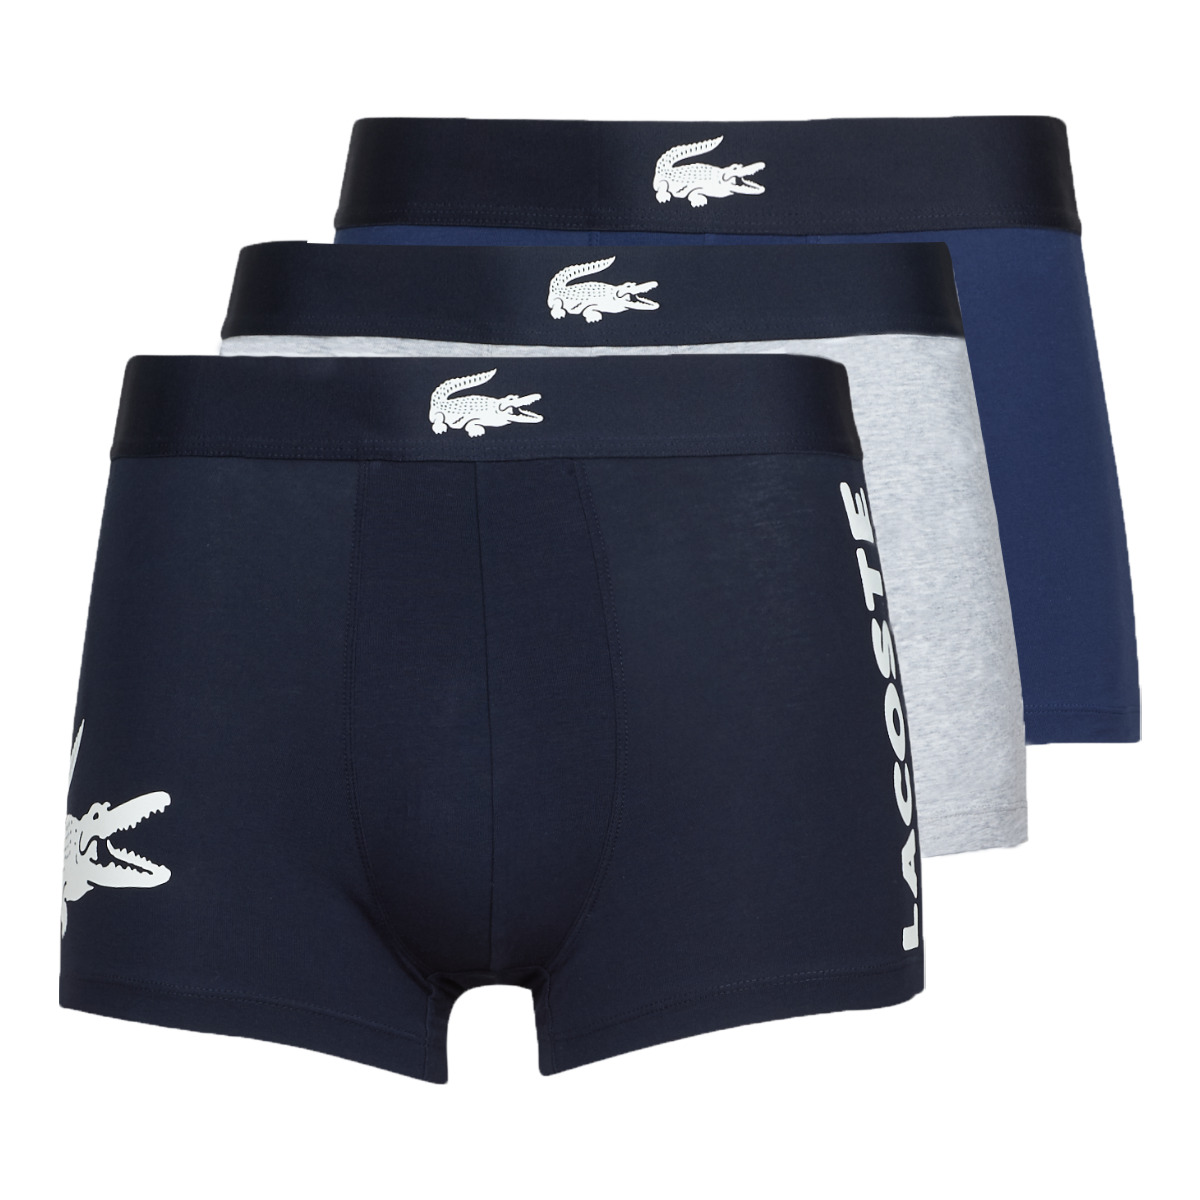 Lacoste 3 Pack Cotton Stretch Trunks 5H3401 - Black with Blue/Sky Blue